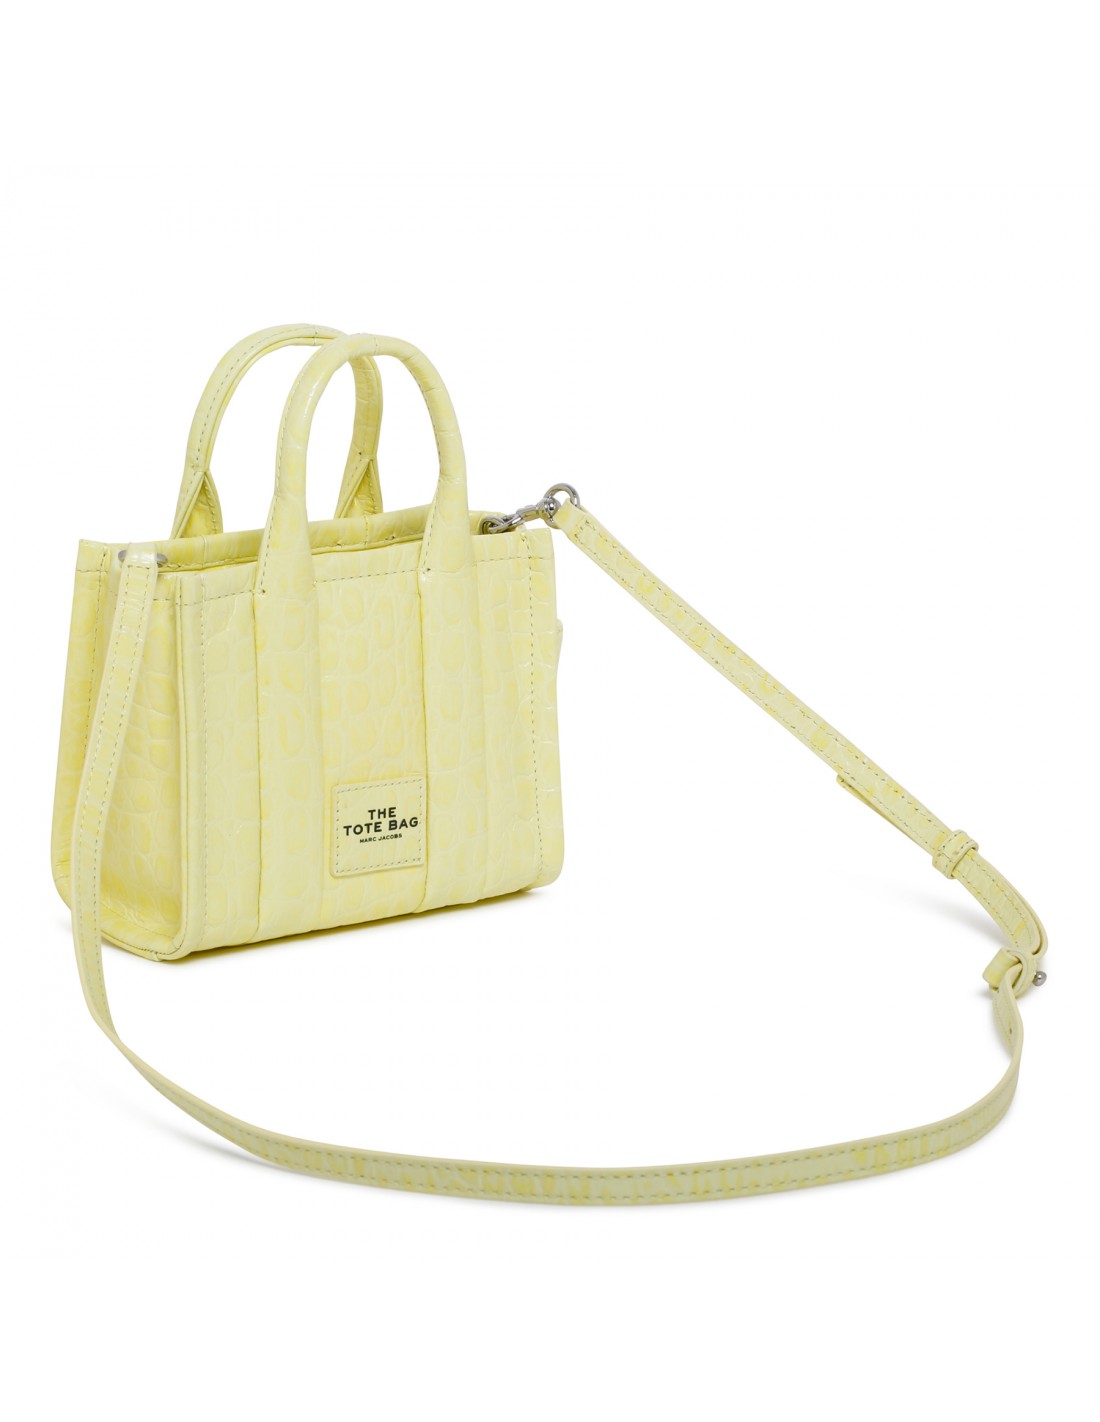 The Shiny Crinkle yellow micro tote